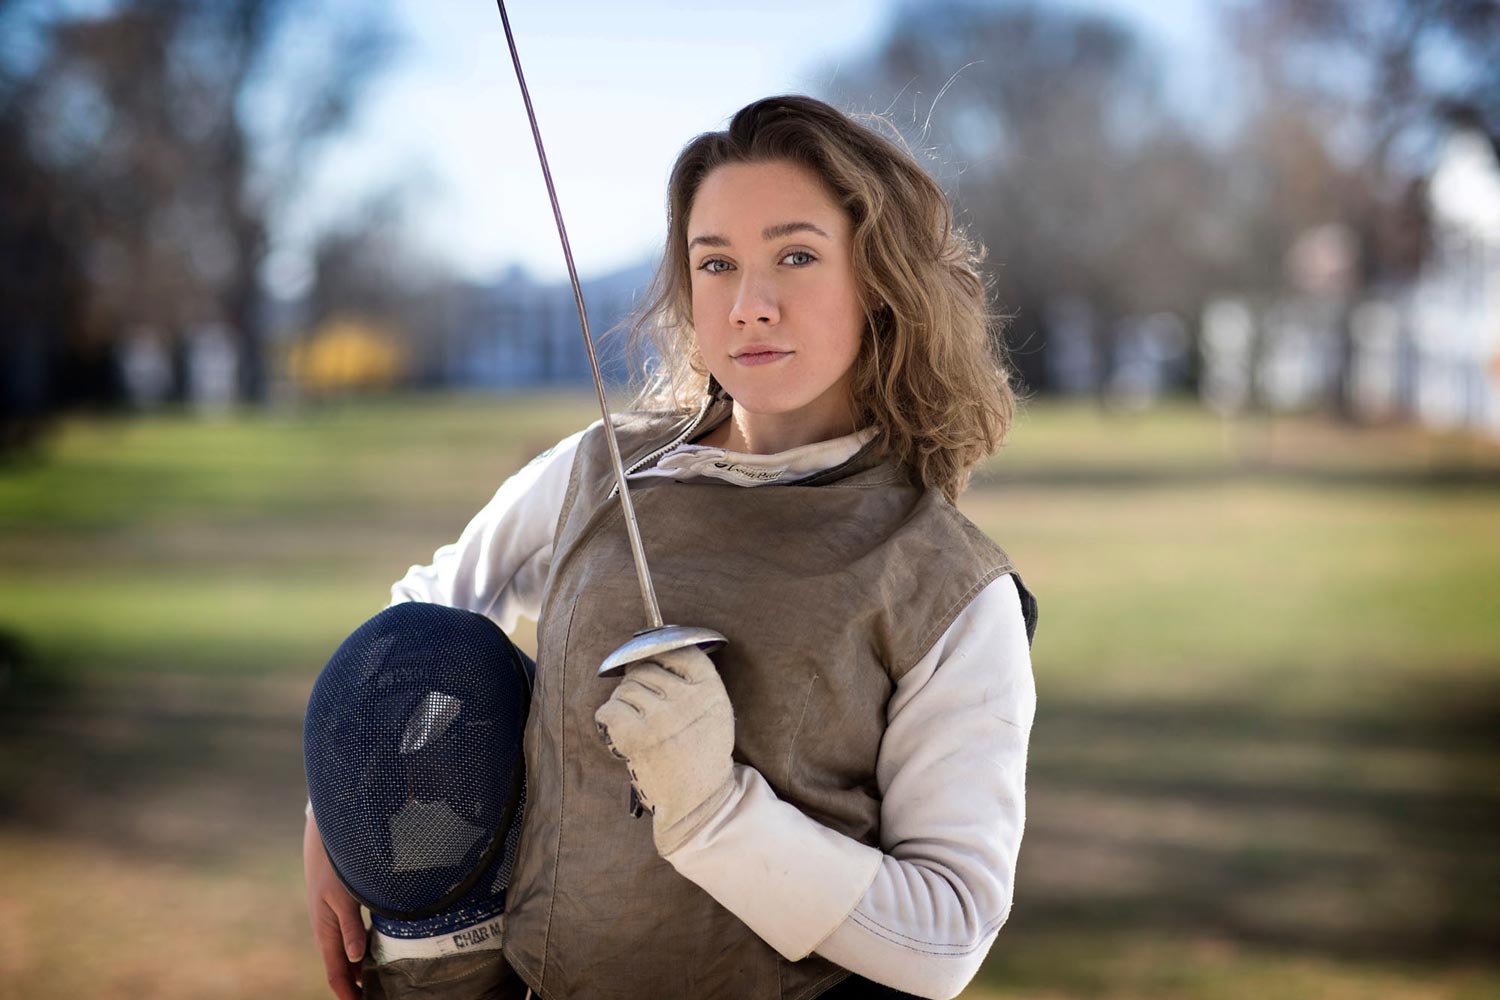 In addition to competing herself, Grayson Katzenbach is a fencing coach and referee for the U.S. Fencing Association.